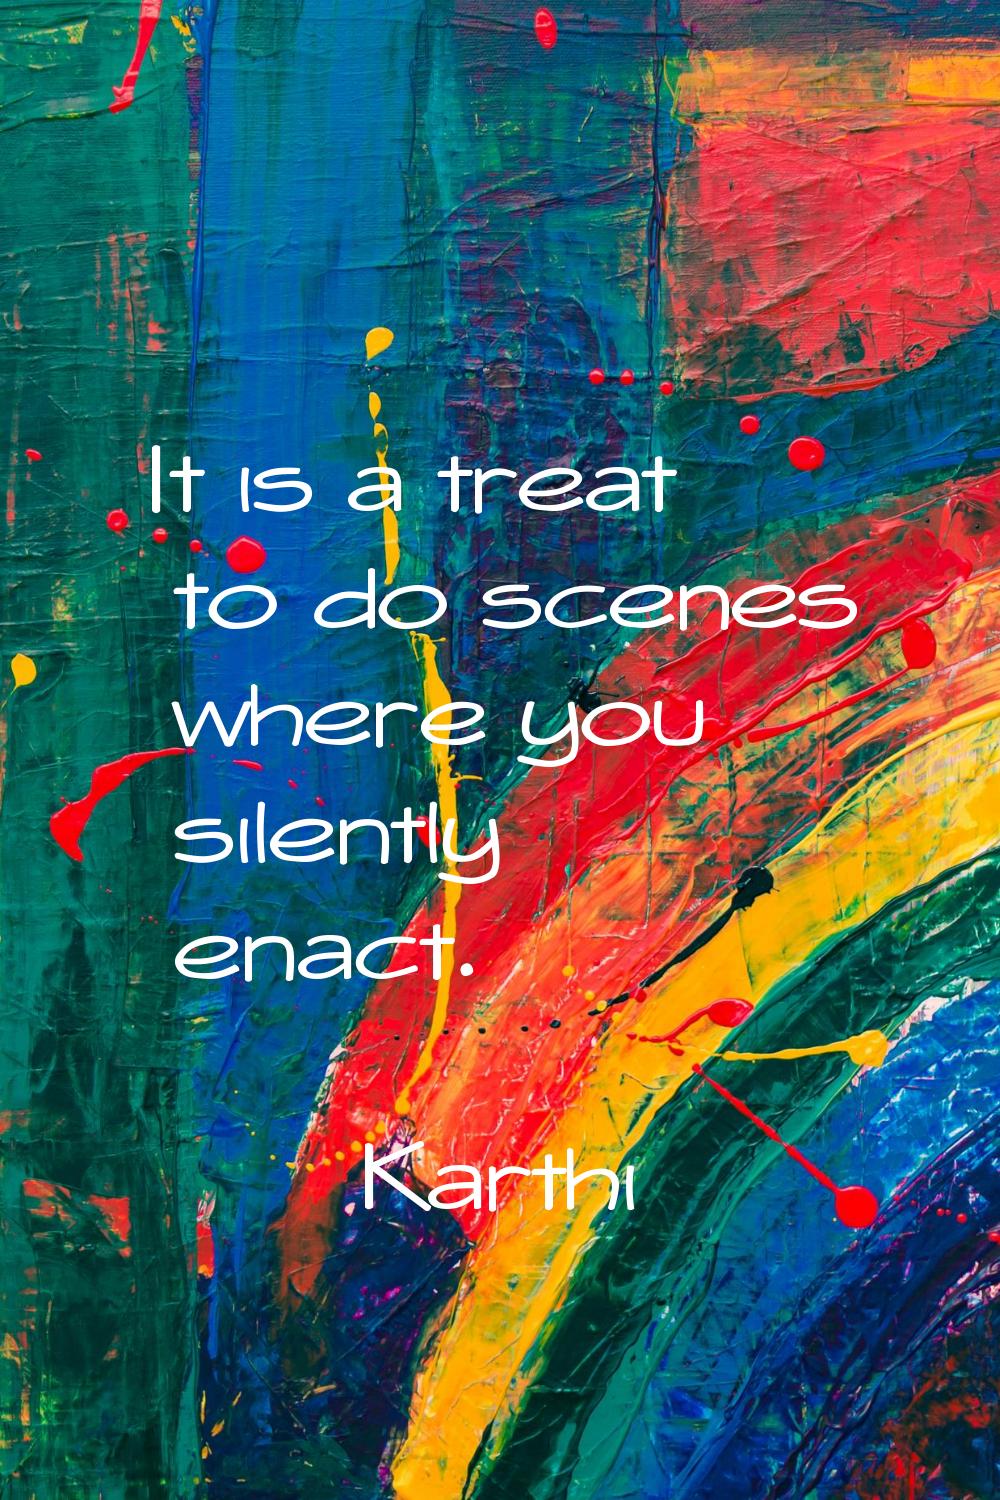 It is a treat to do scenes where you silently enact.